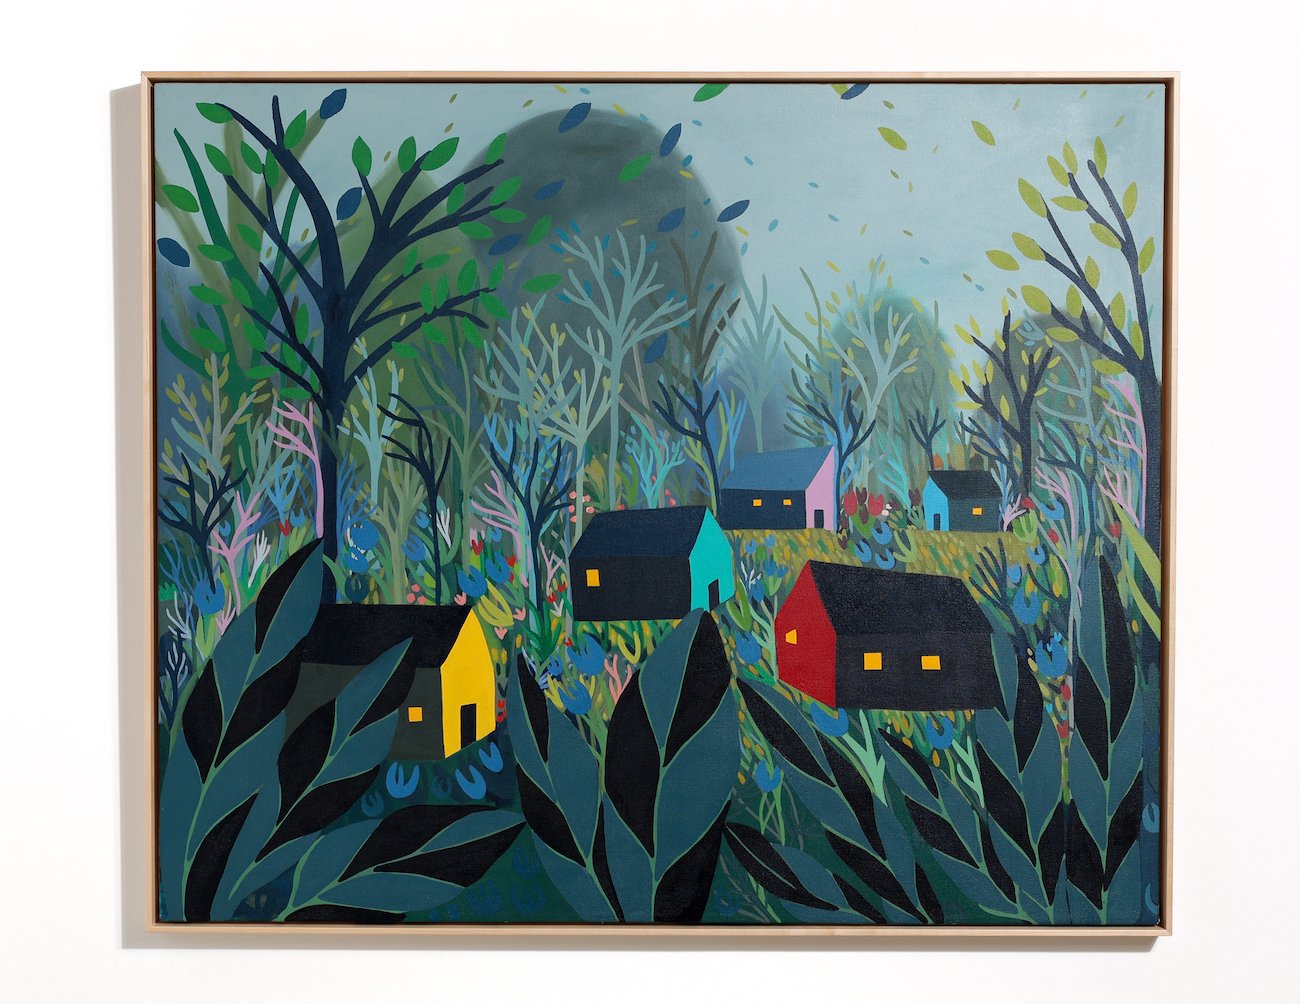 "Looking Out..." Oil Painting of Barn Houses in a Wooded Scene by Sage Tucker-Ketcham @ Soapbox Arts Gallery, Burlington, VT 